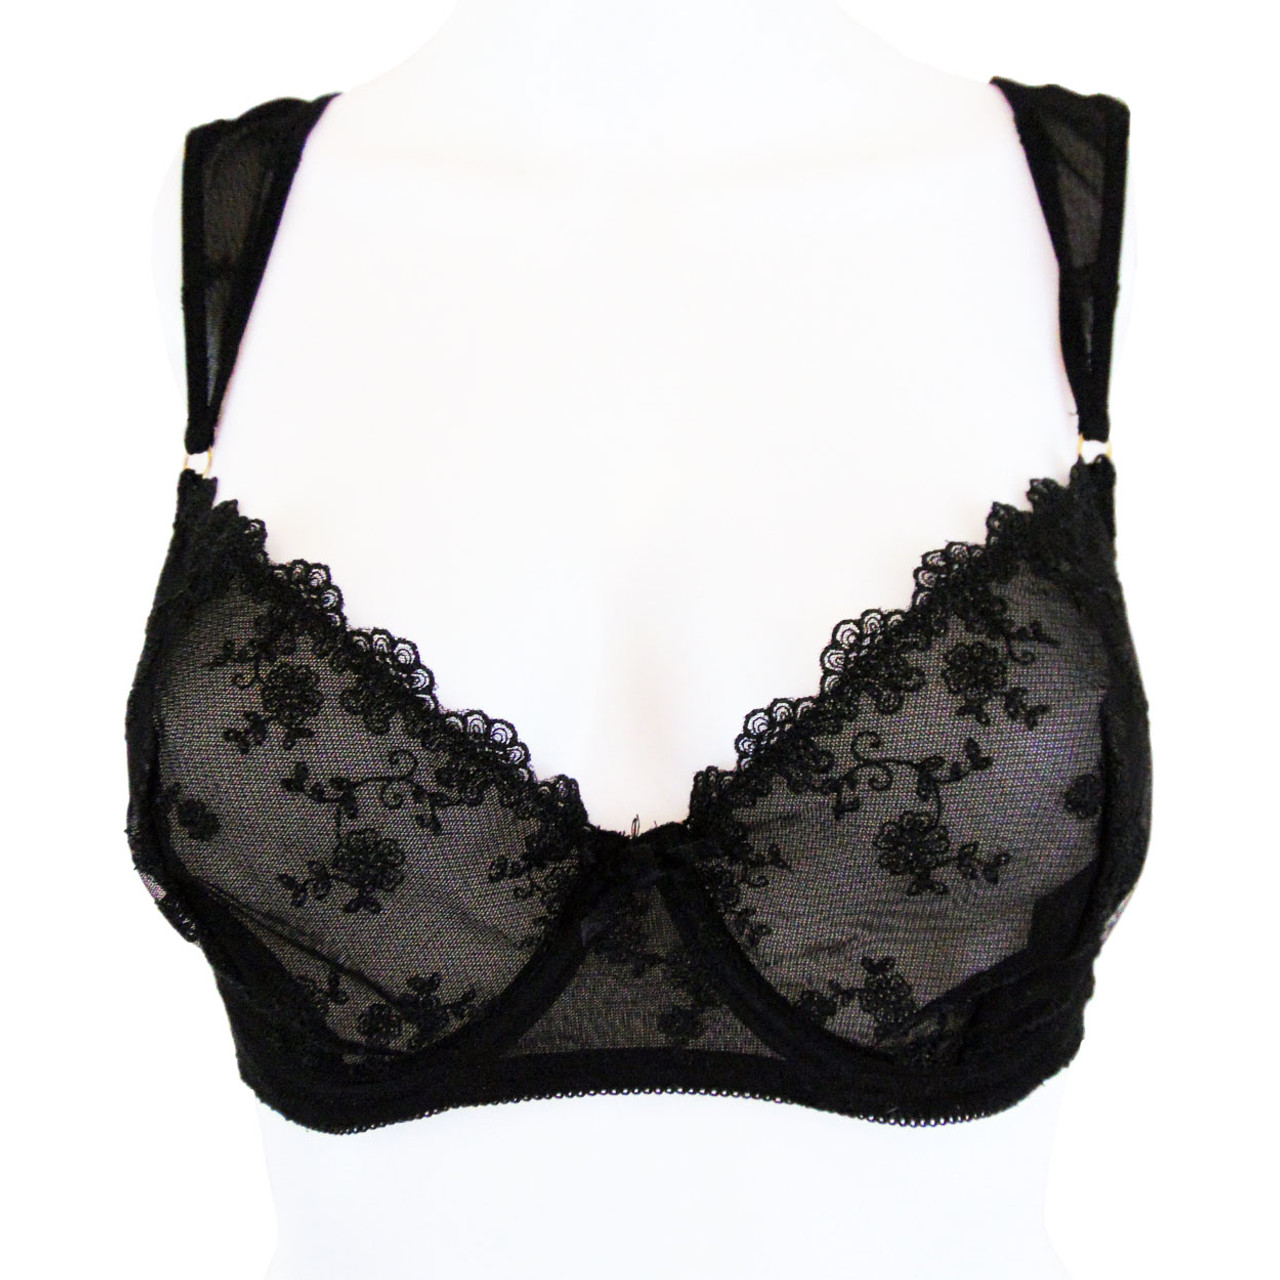 BLUSH Black Lace and Mesh Underwire Bra - Size 34DD  Onestop-Thriftshop  Consignment and Discount Bouitique